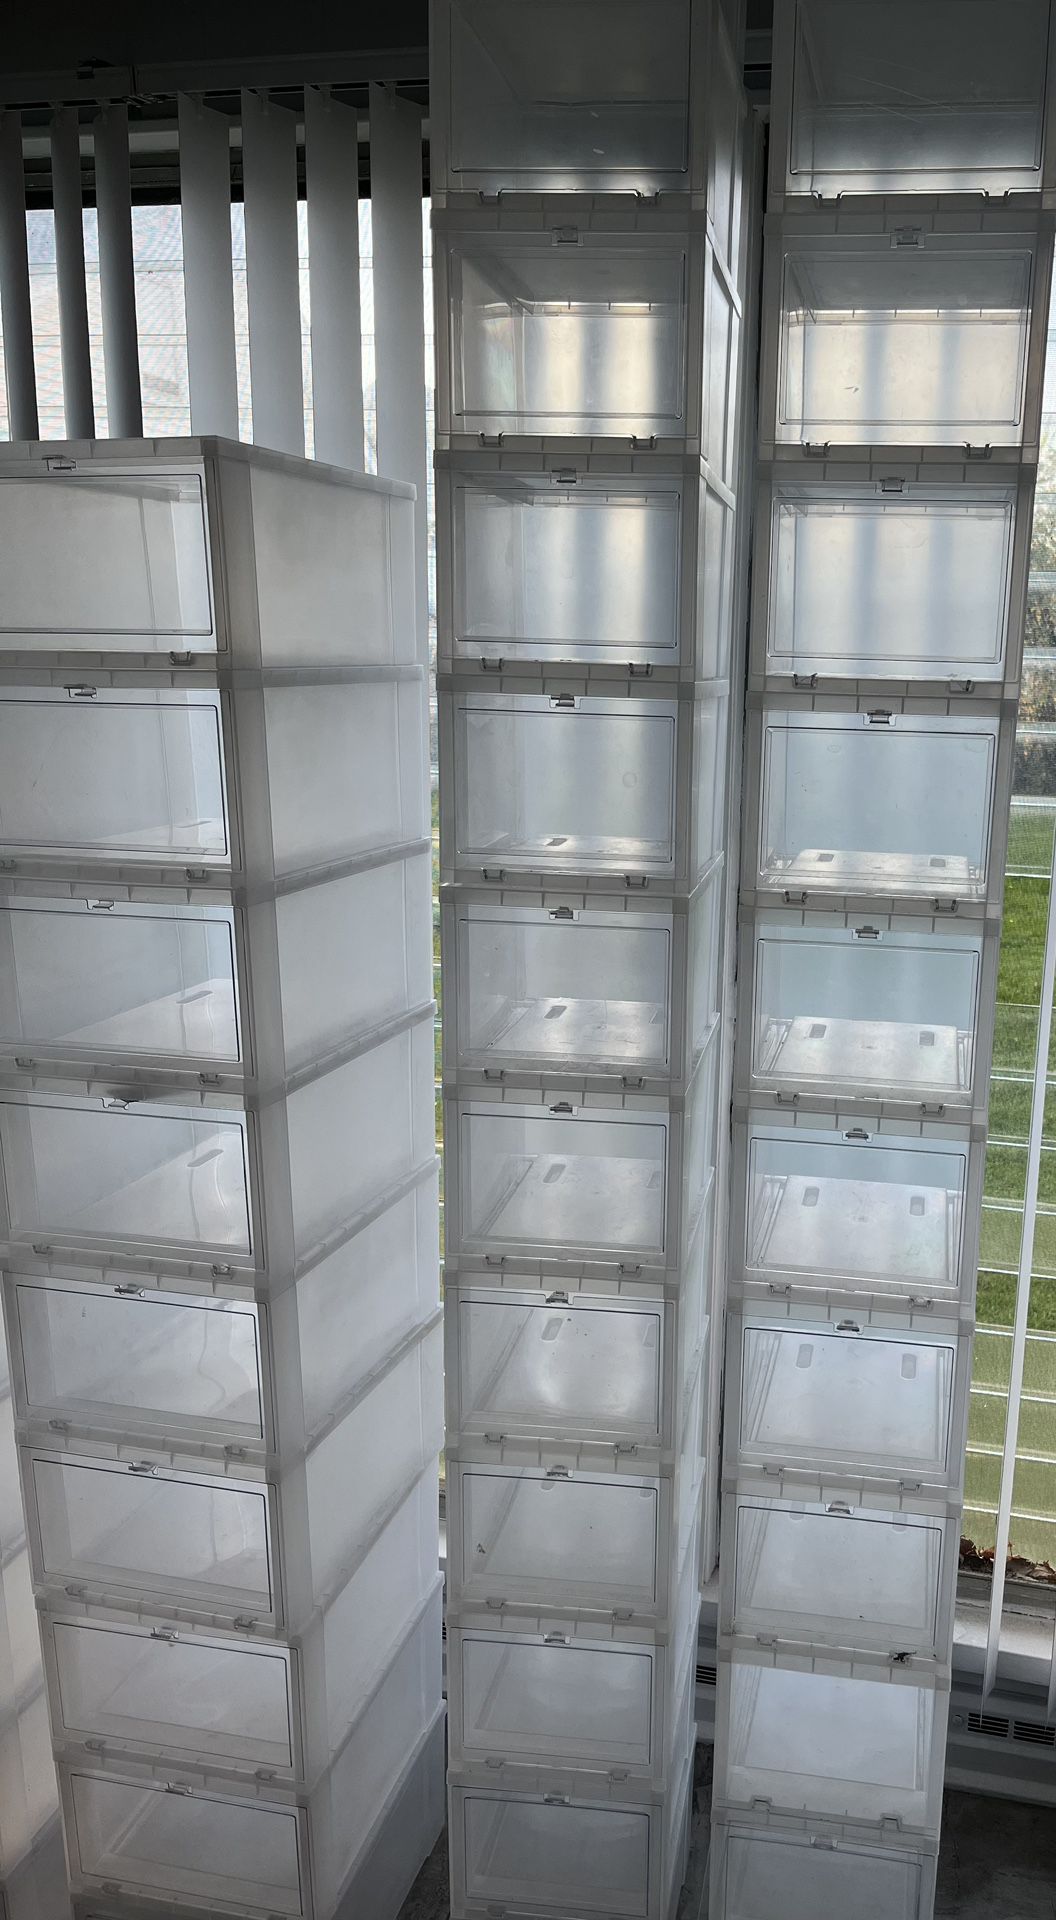 Shoe Racks / containers